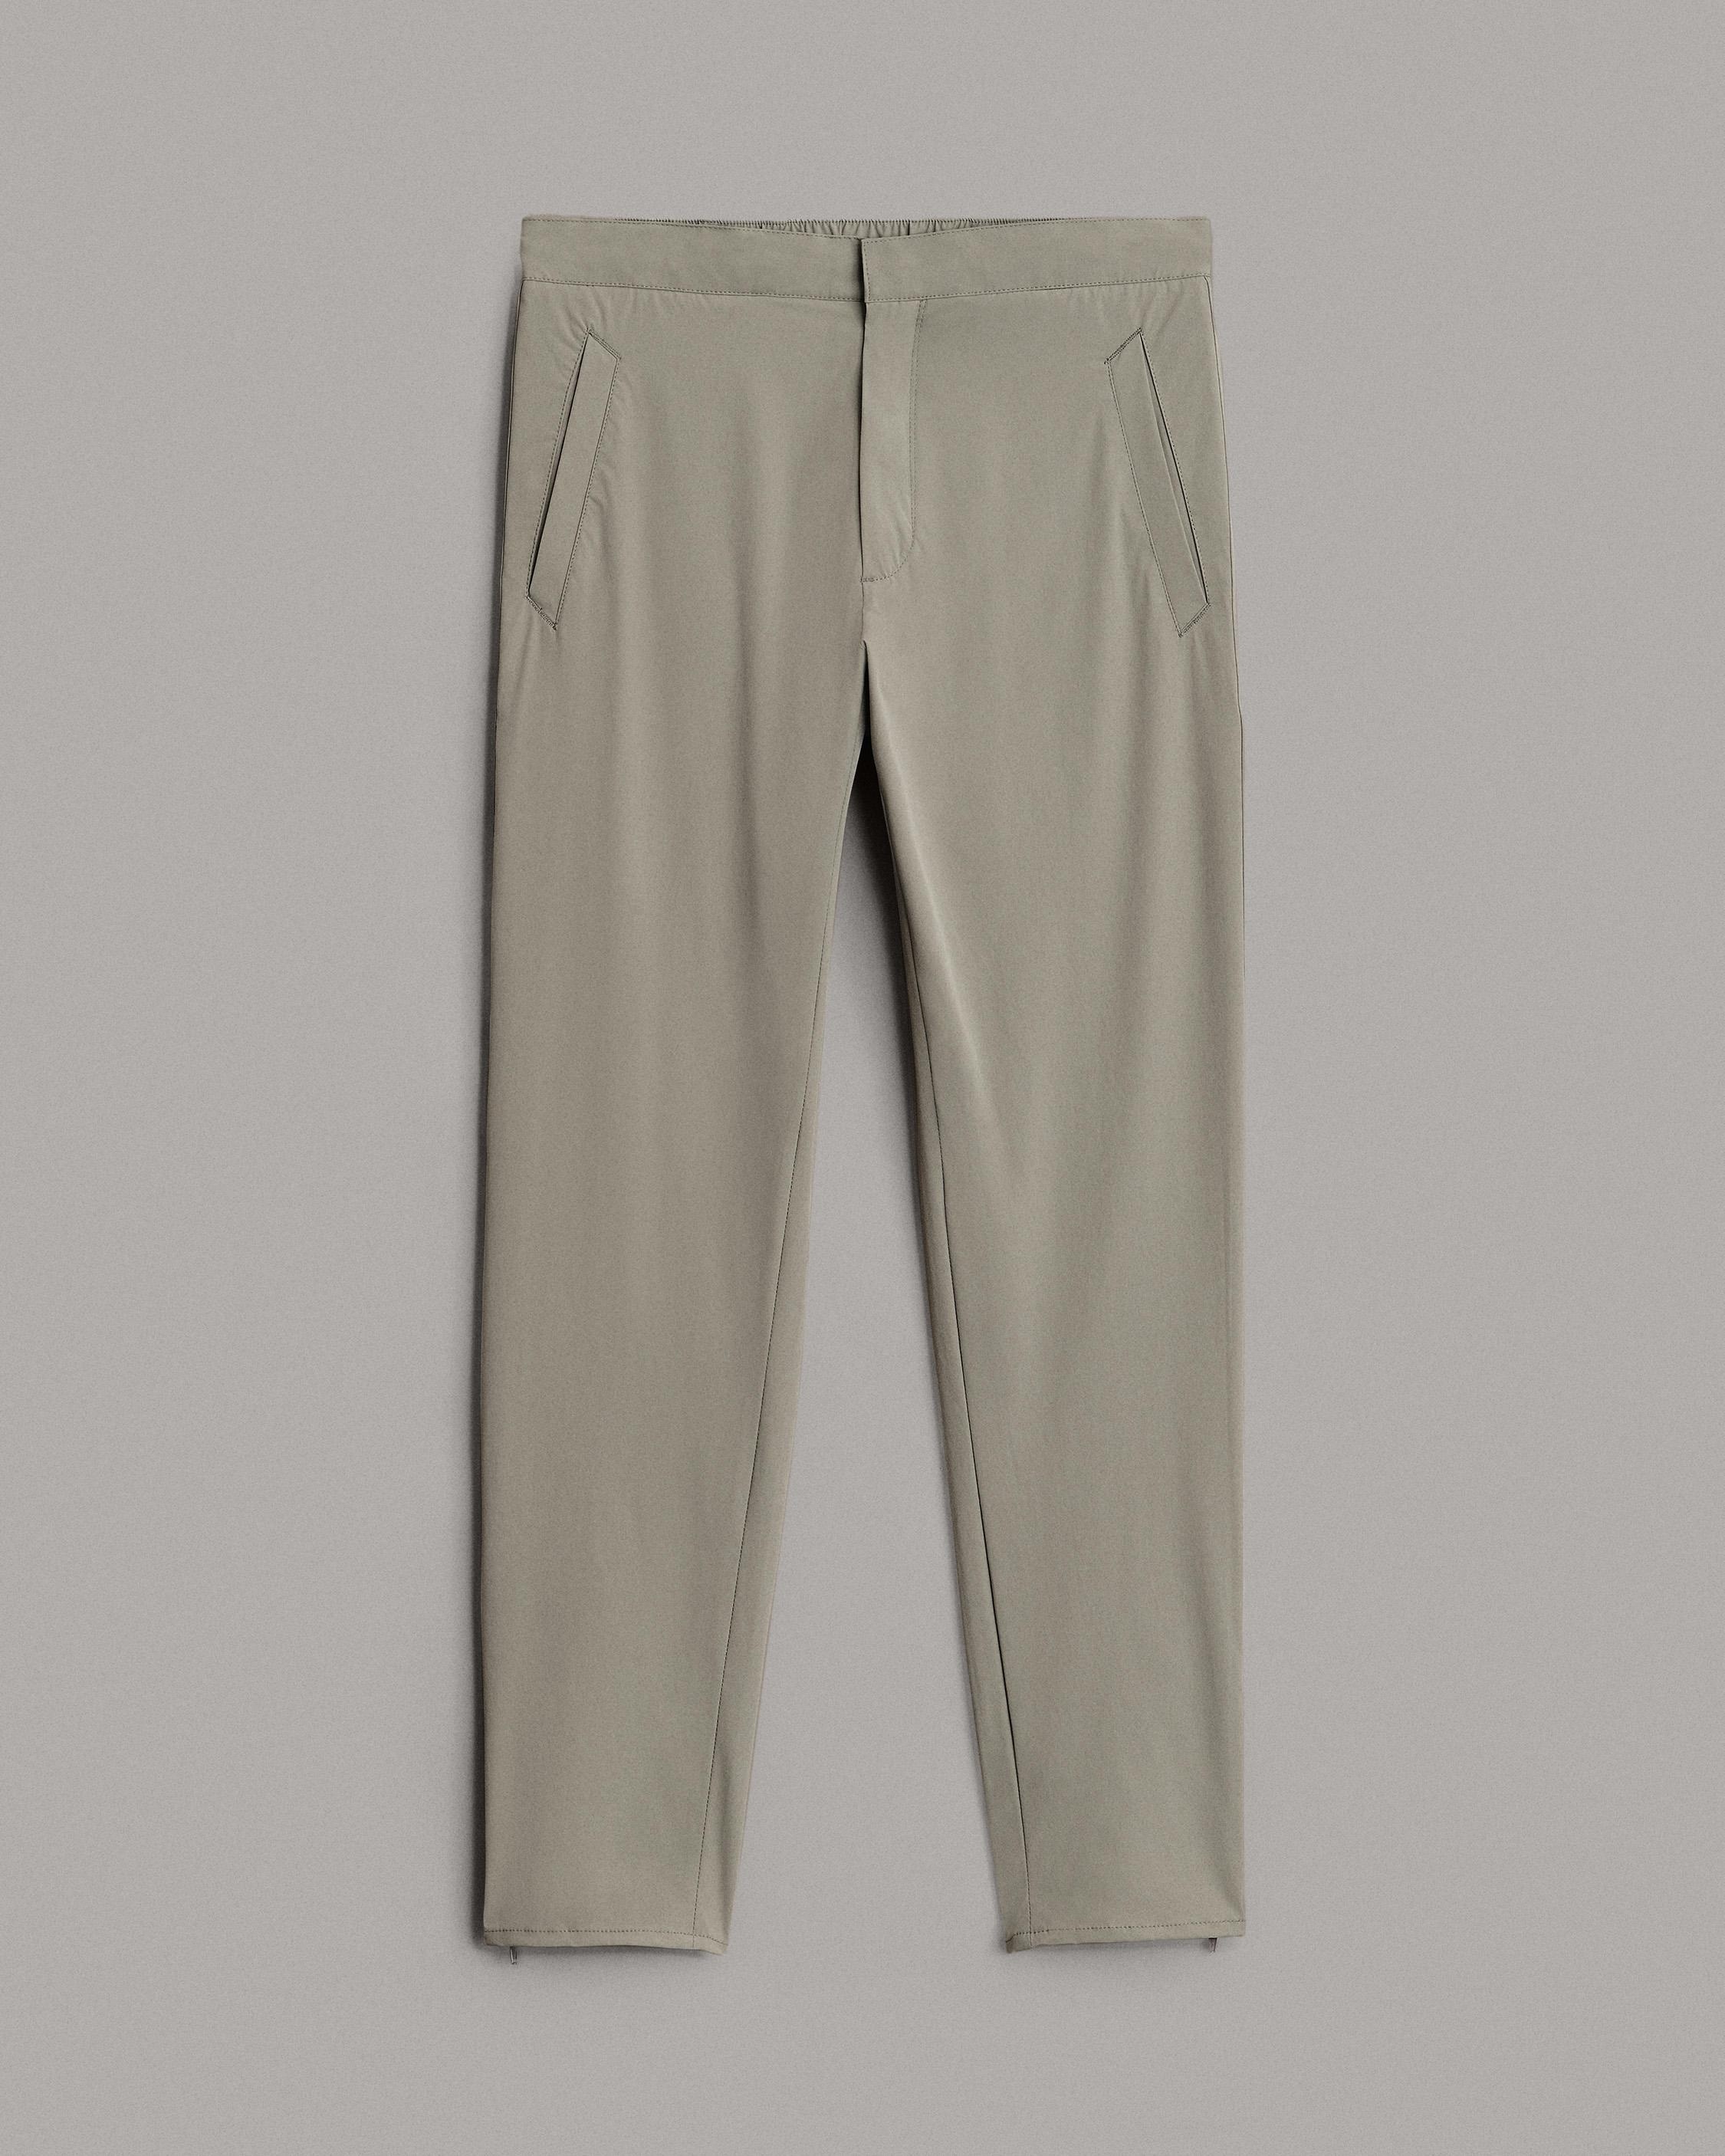 Pursuit Zander Technical Track Pant
Relaxed Fit - 1